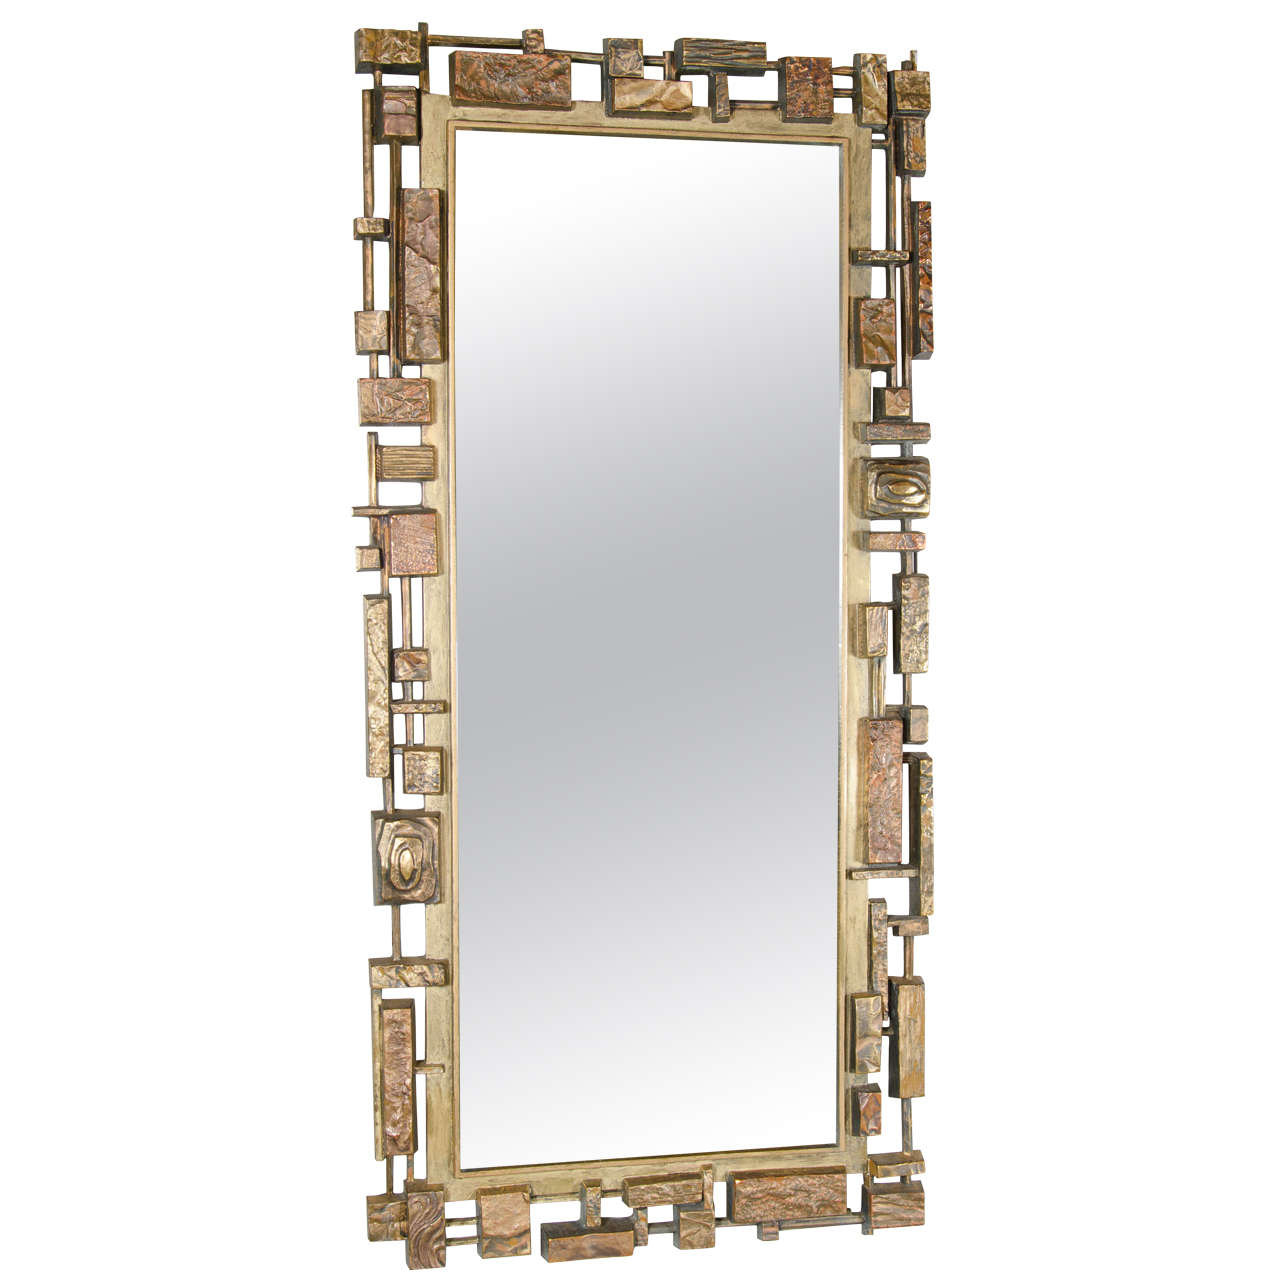 Mid-Centuy Modernist 'Syroco' Brutalist Mirror with Gilt Detailing